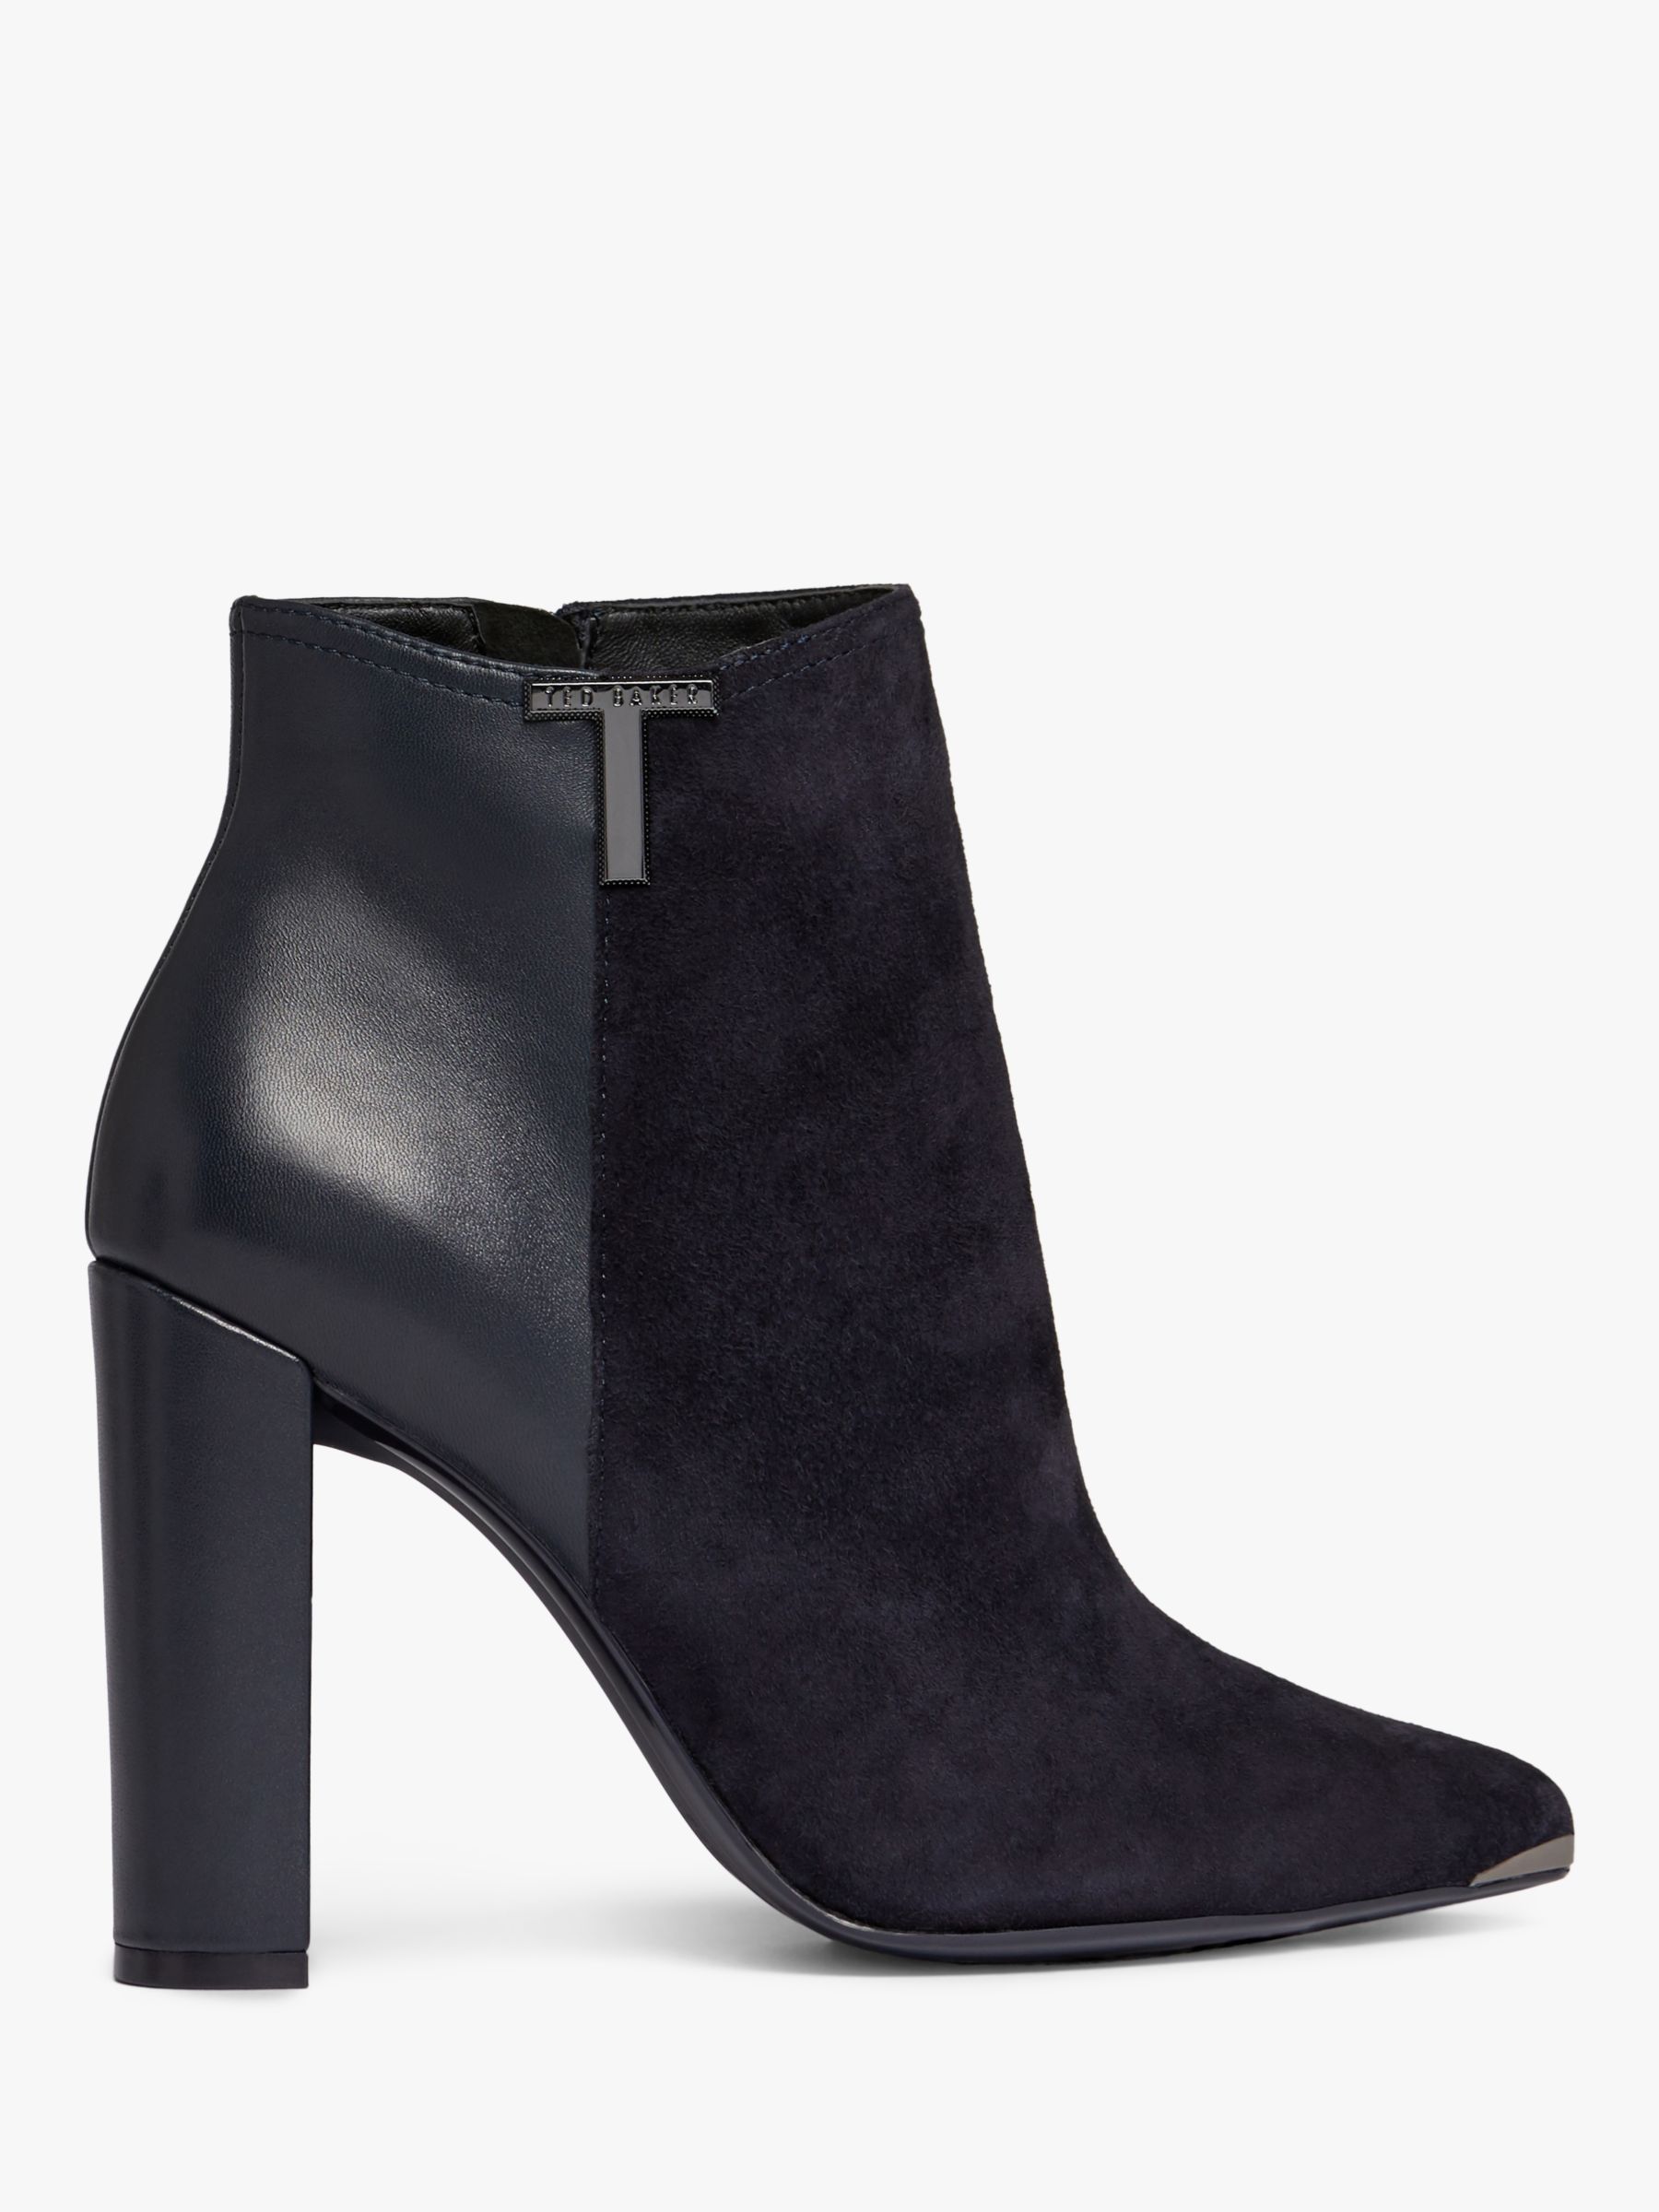 Ted Baker Inala Leather Suede Point Toe Ankle Boots